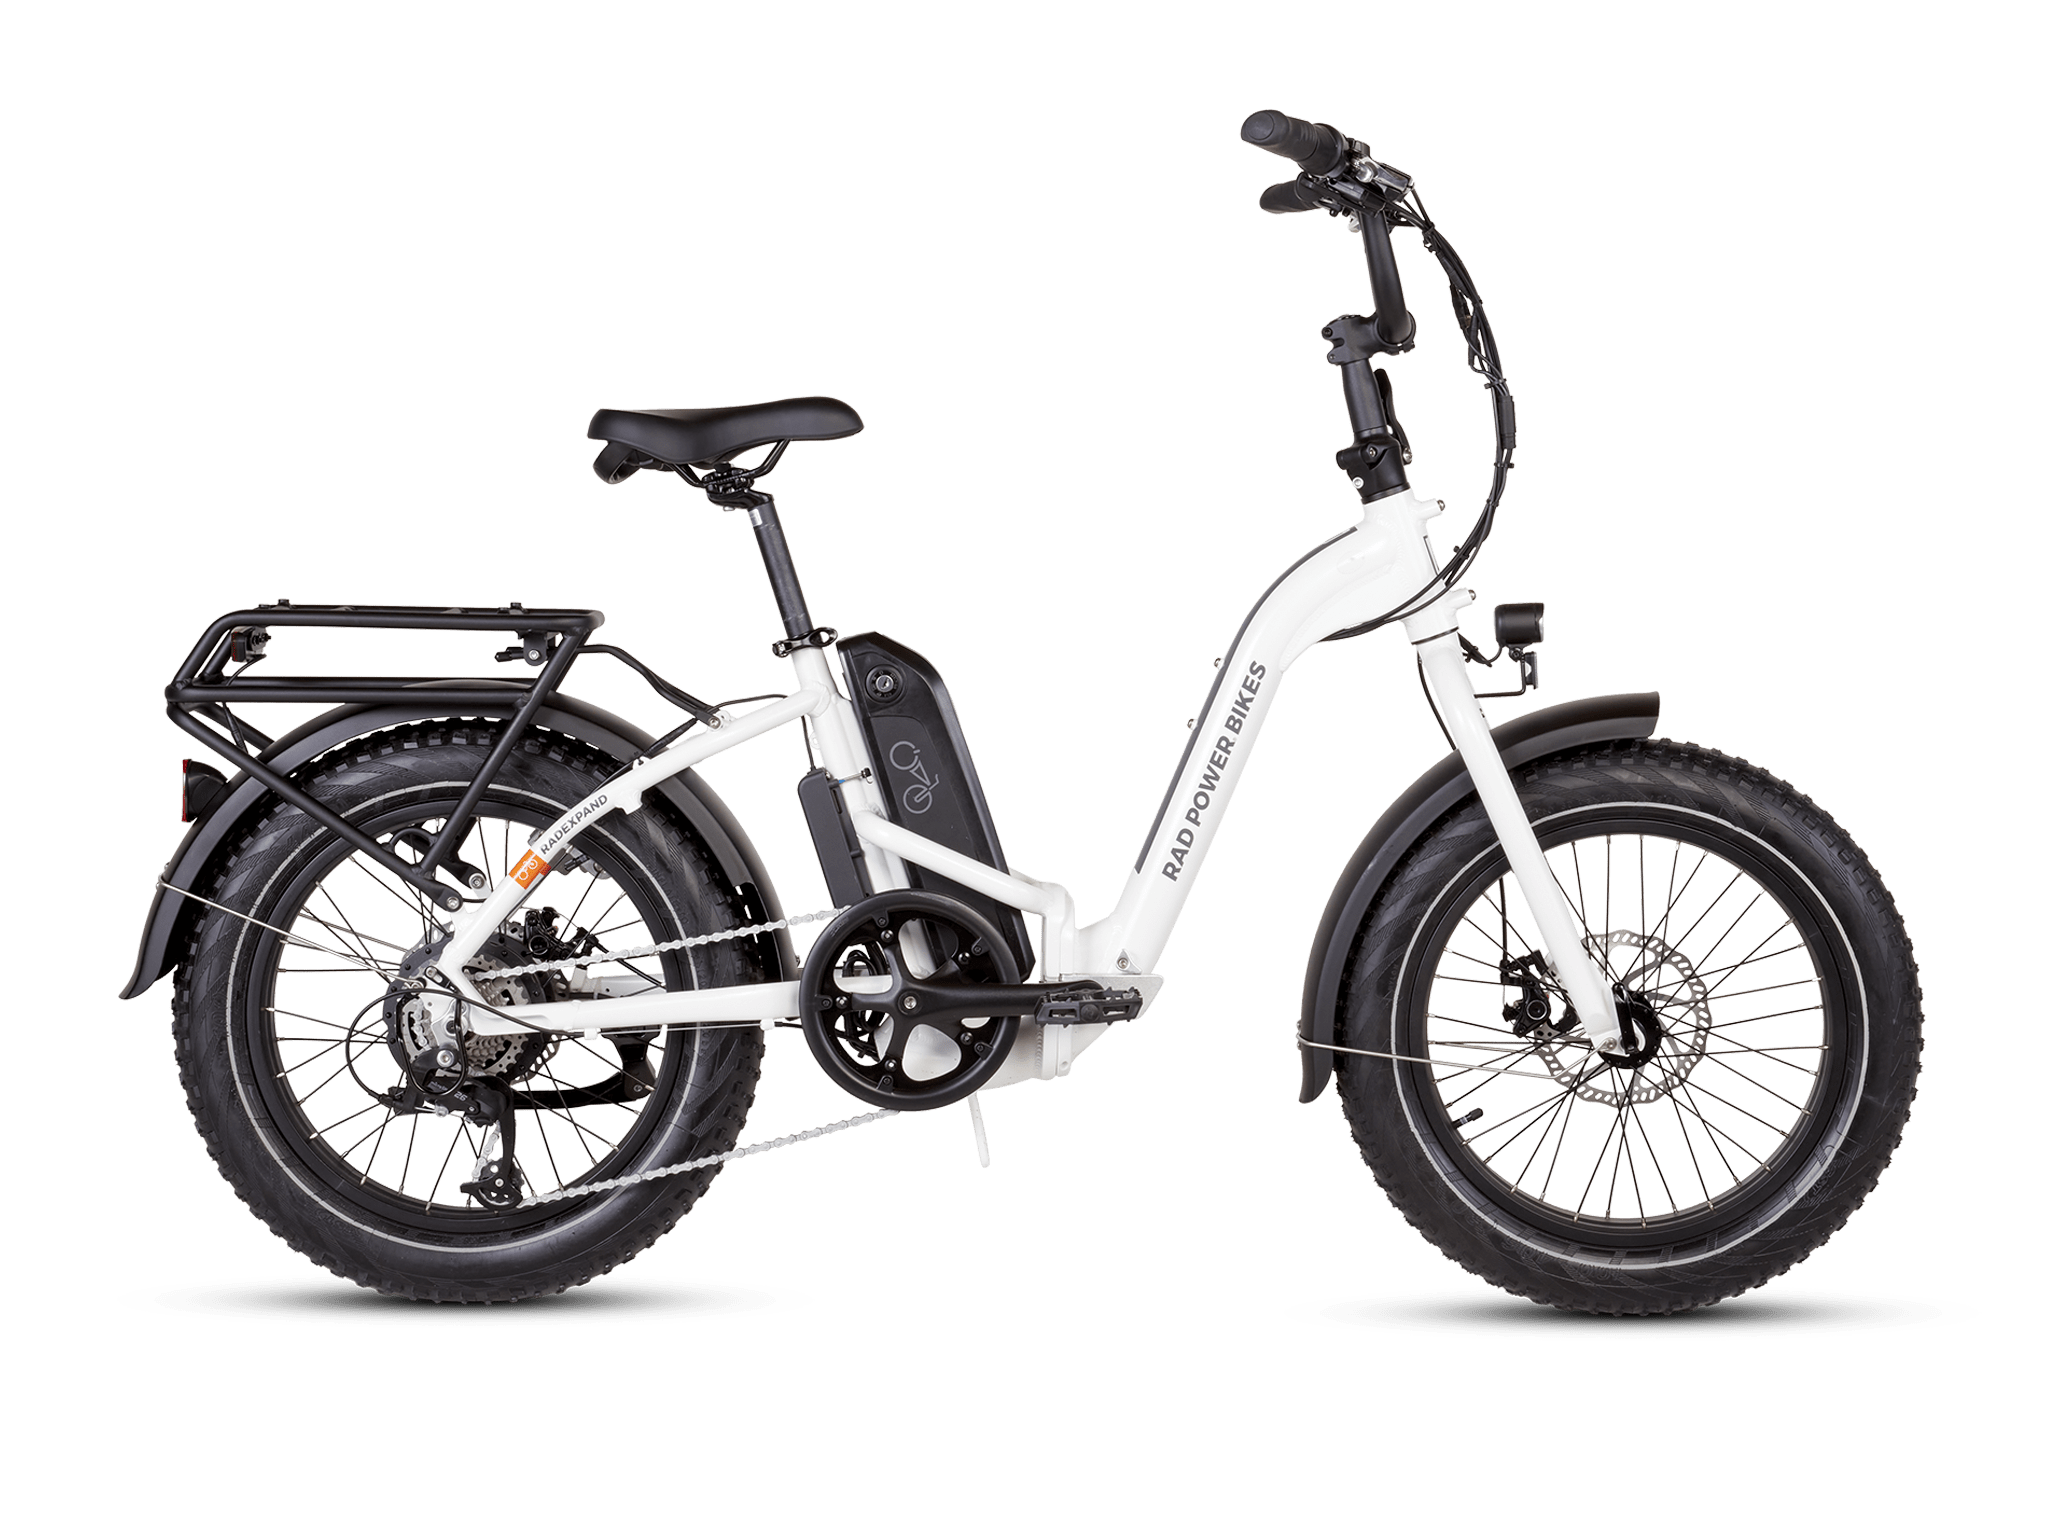 Get $300 Off A RadExpand 5 Folding E-Bike Plus A Free Extra Battery, For $799 In Savings - CleanTechnica